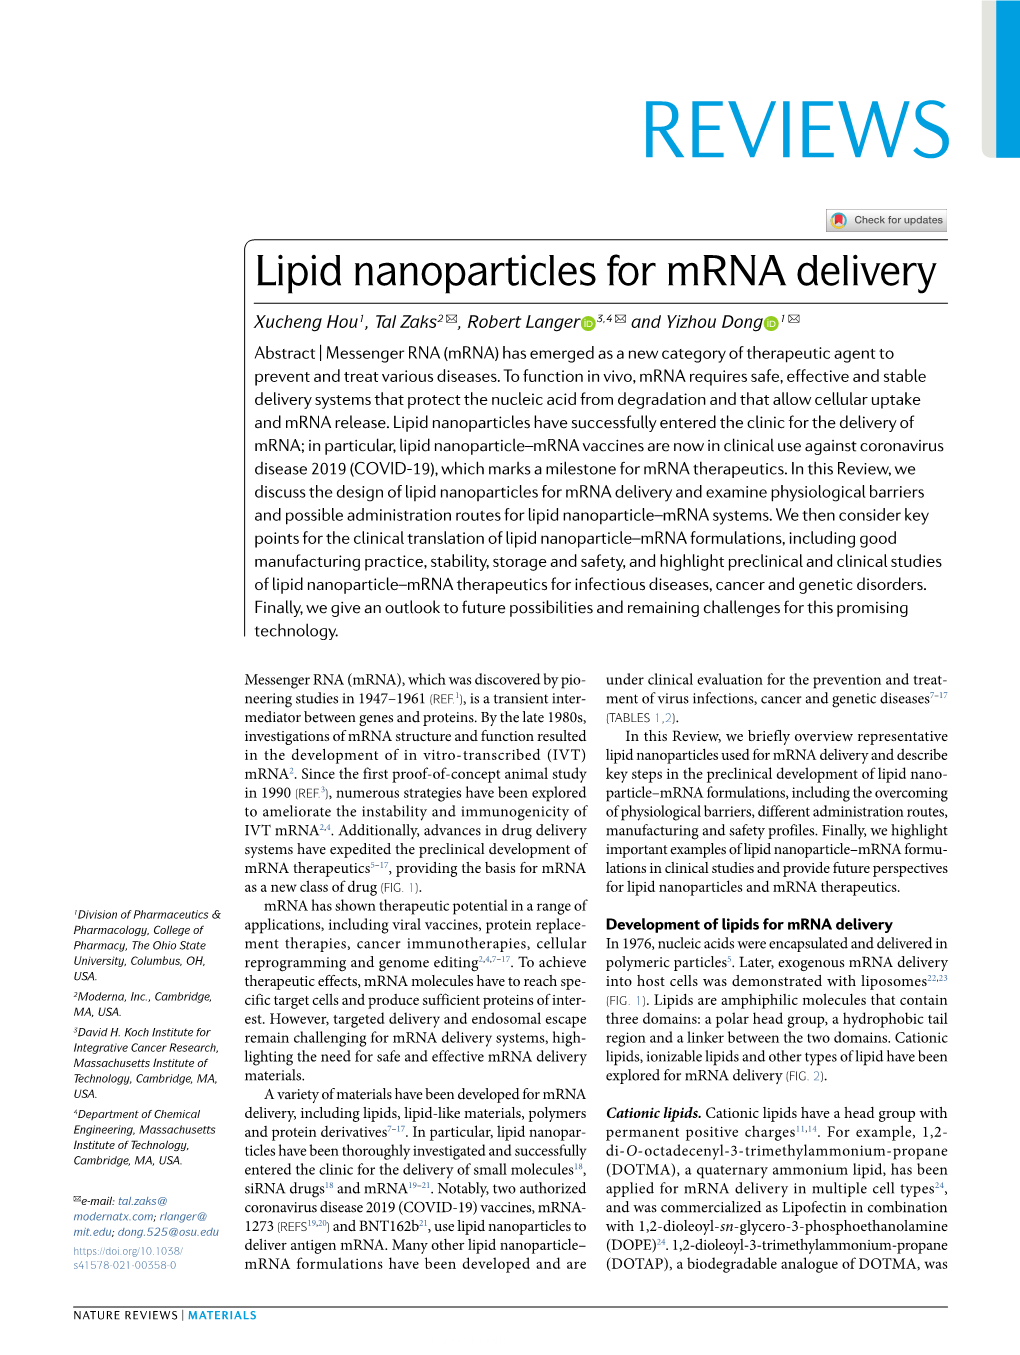 Lipid Nanoparticles for Mrna Delivery